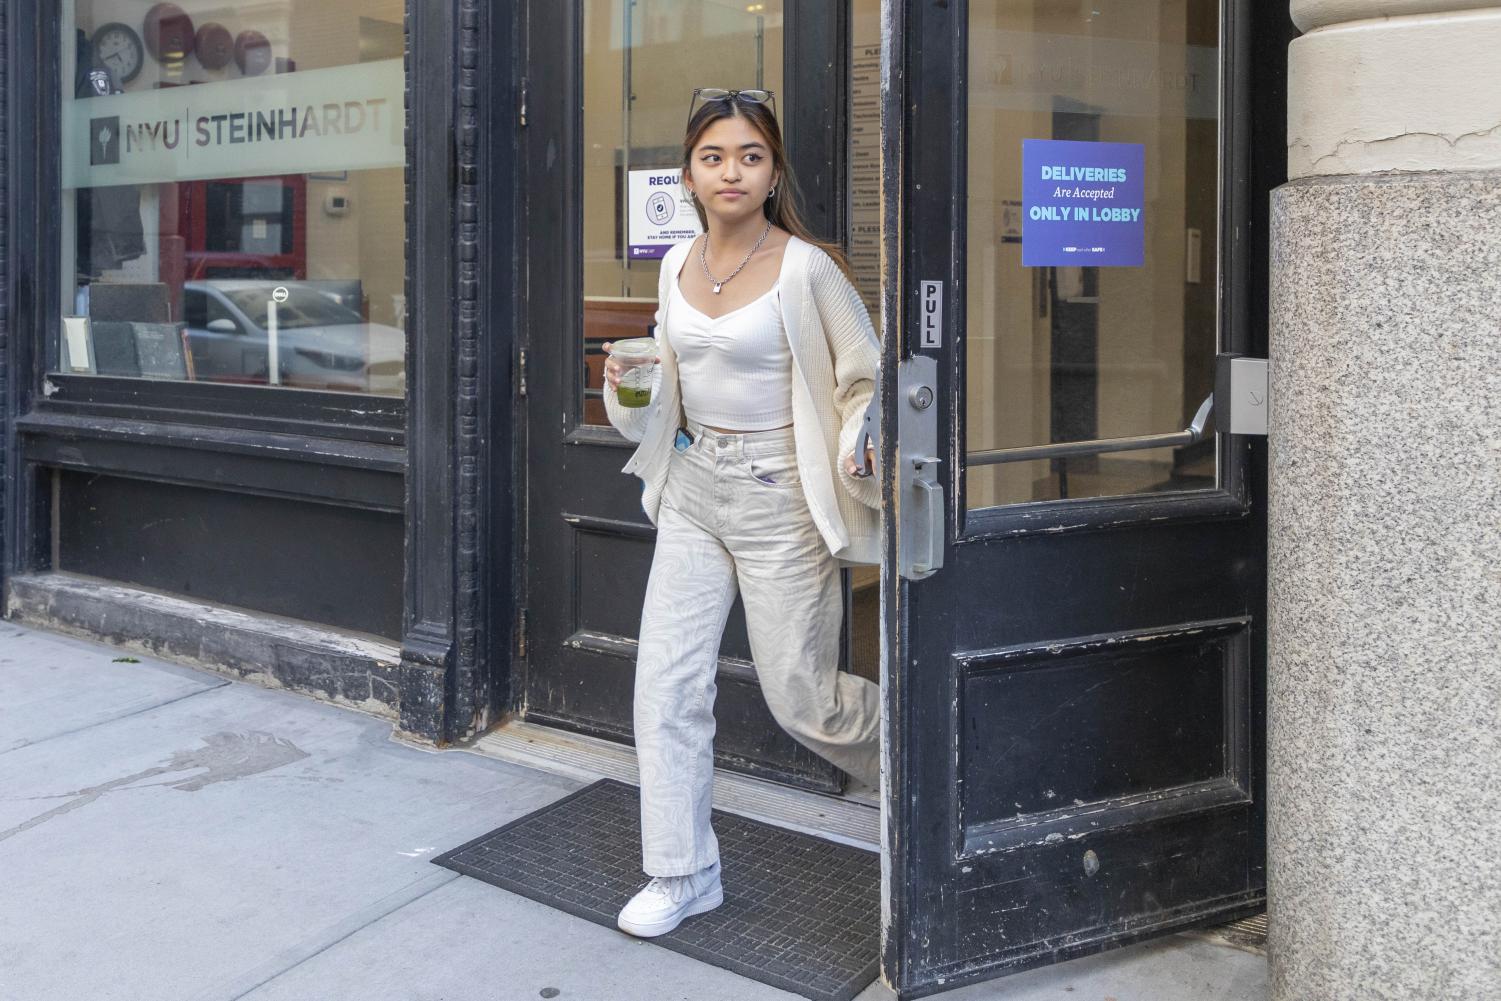 Miu Sato walks outside of a Steinhardt building wearing a patterned white tank top, white cardigan and white printed jeans.